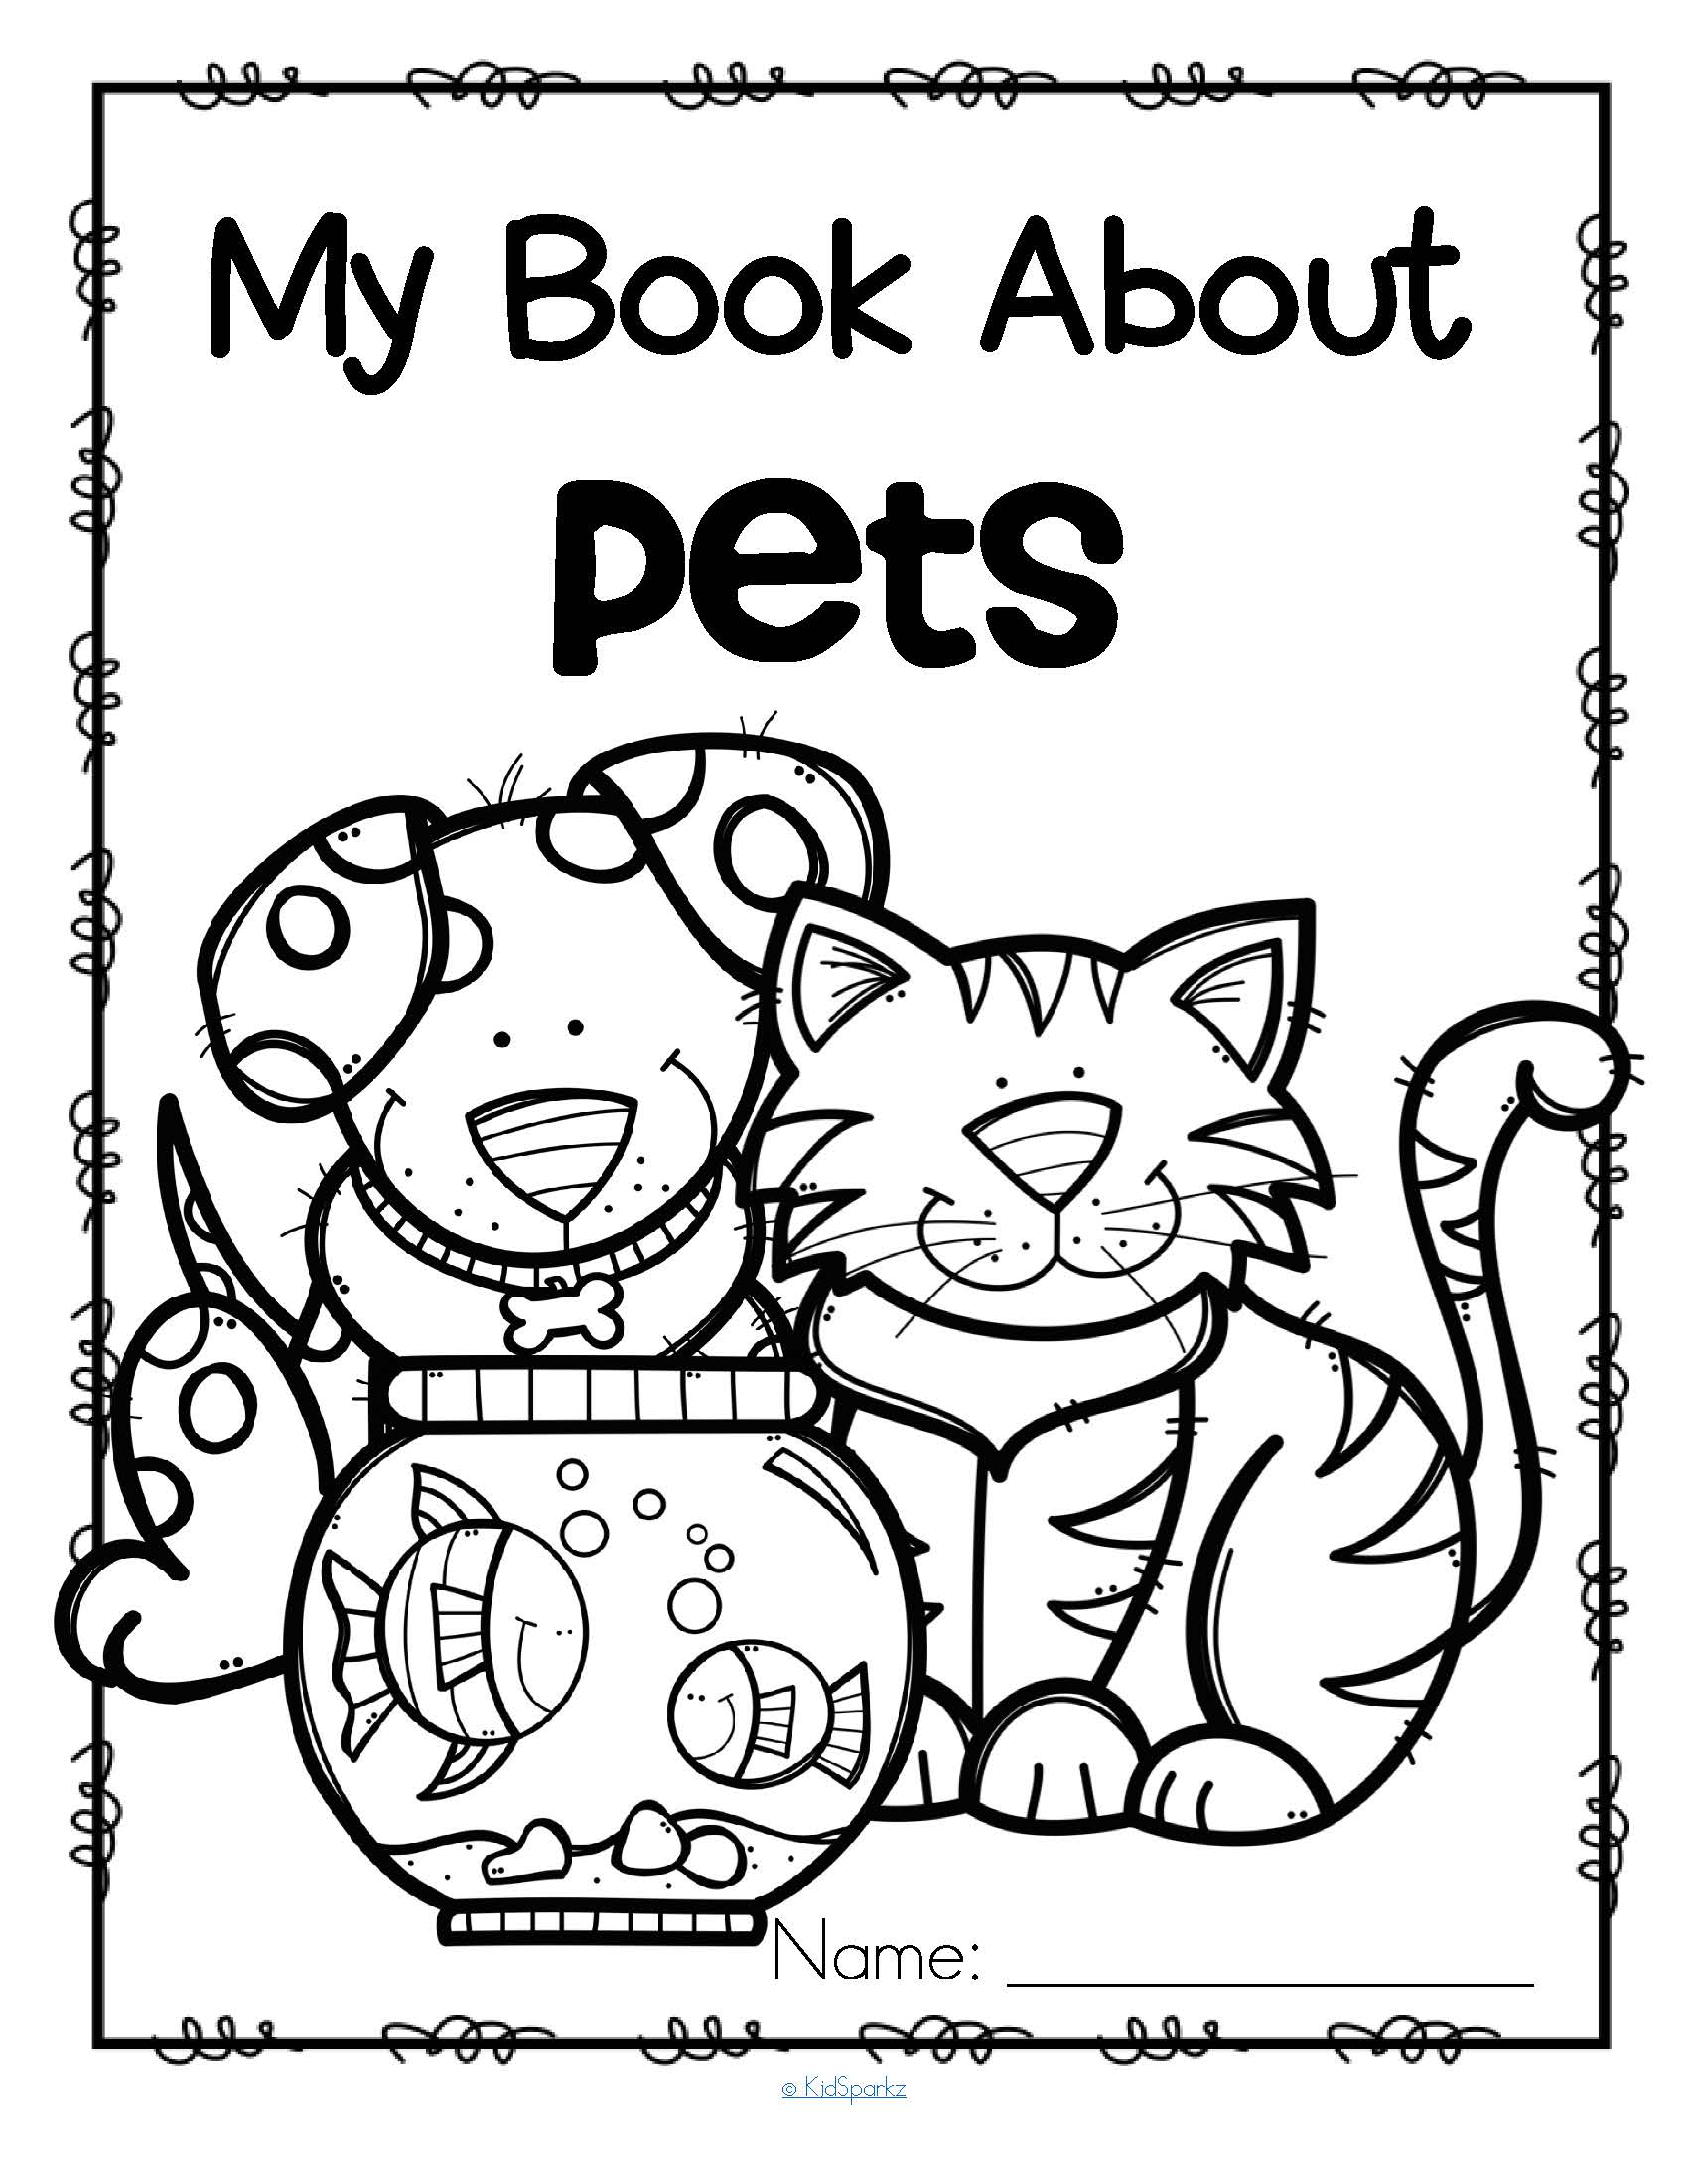 Pets Activity Printables for Preschool Read, Color and Draw Make a Book